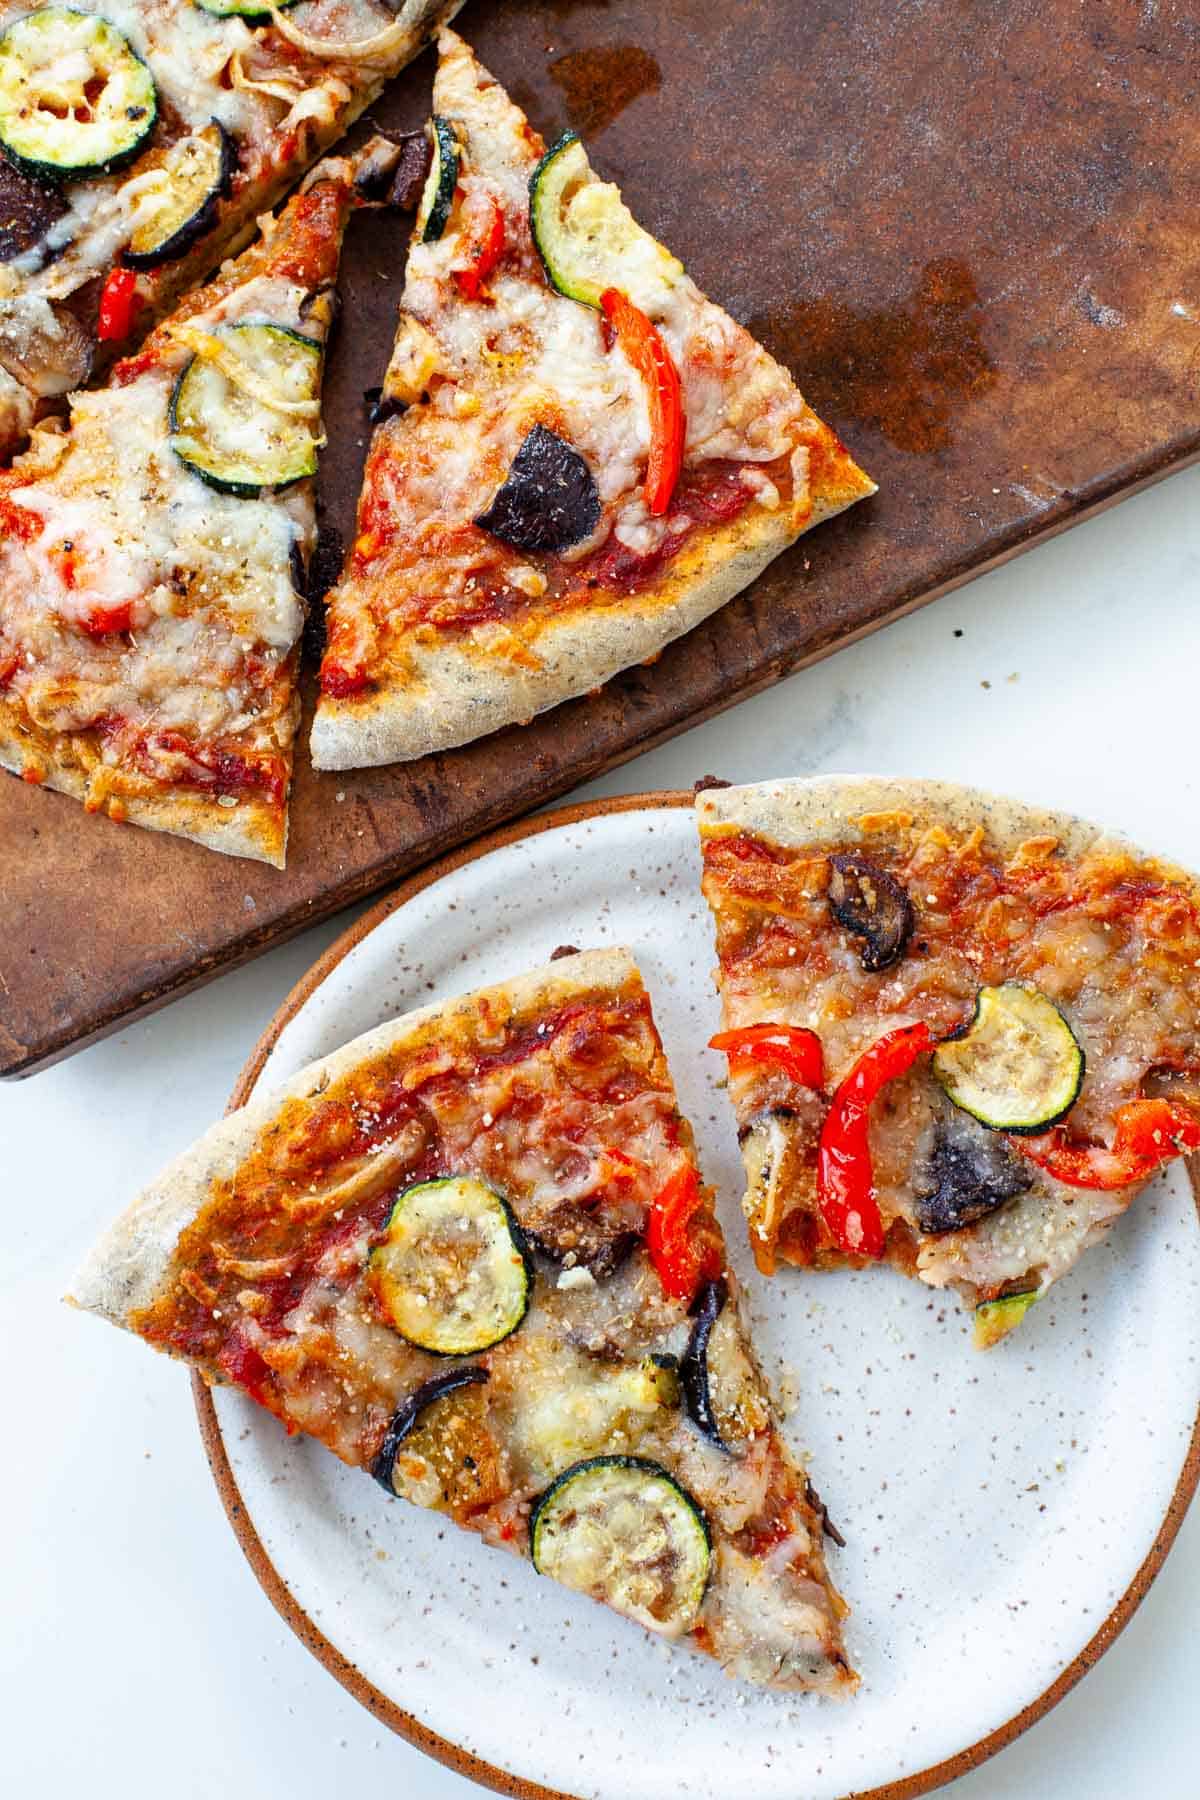 roasted vegetable pizza slices on white speckled plate and pizza stone with other pizza slices on it